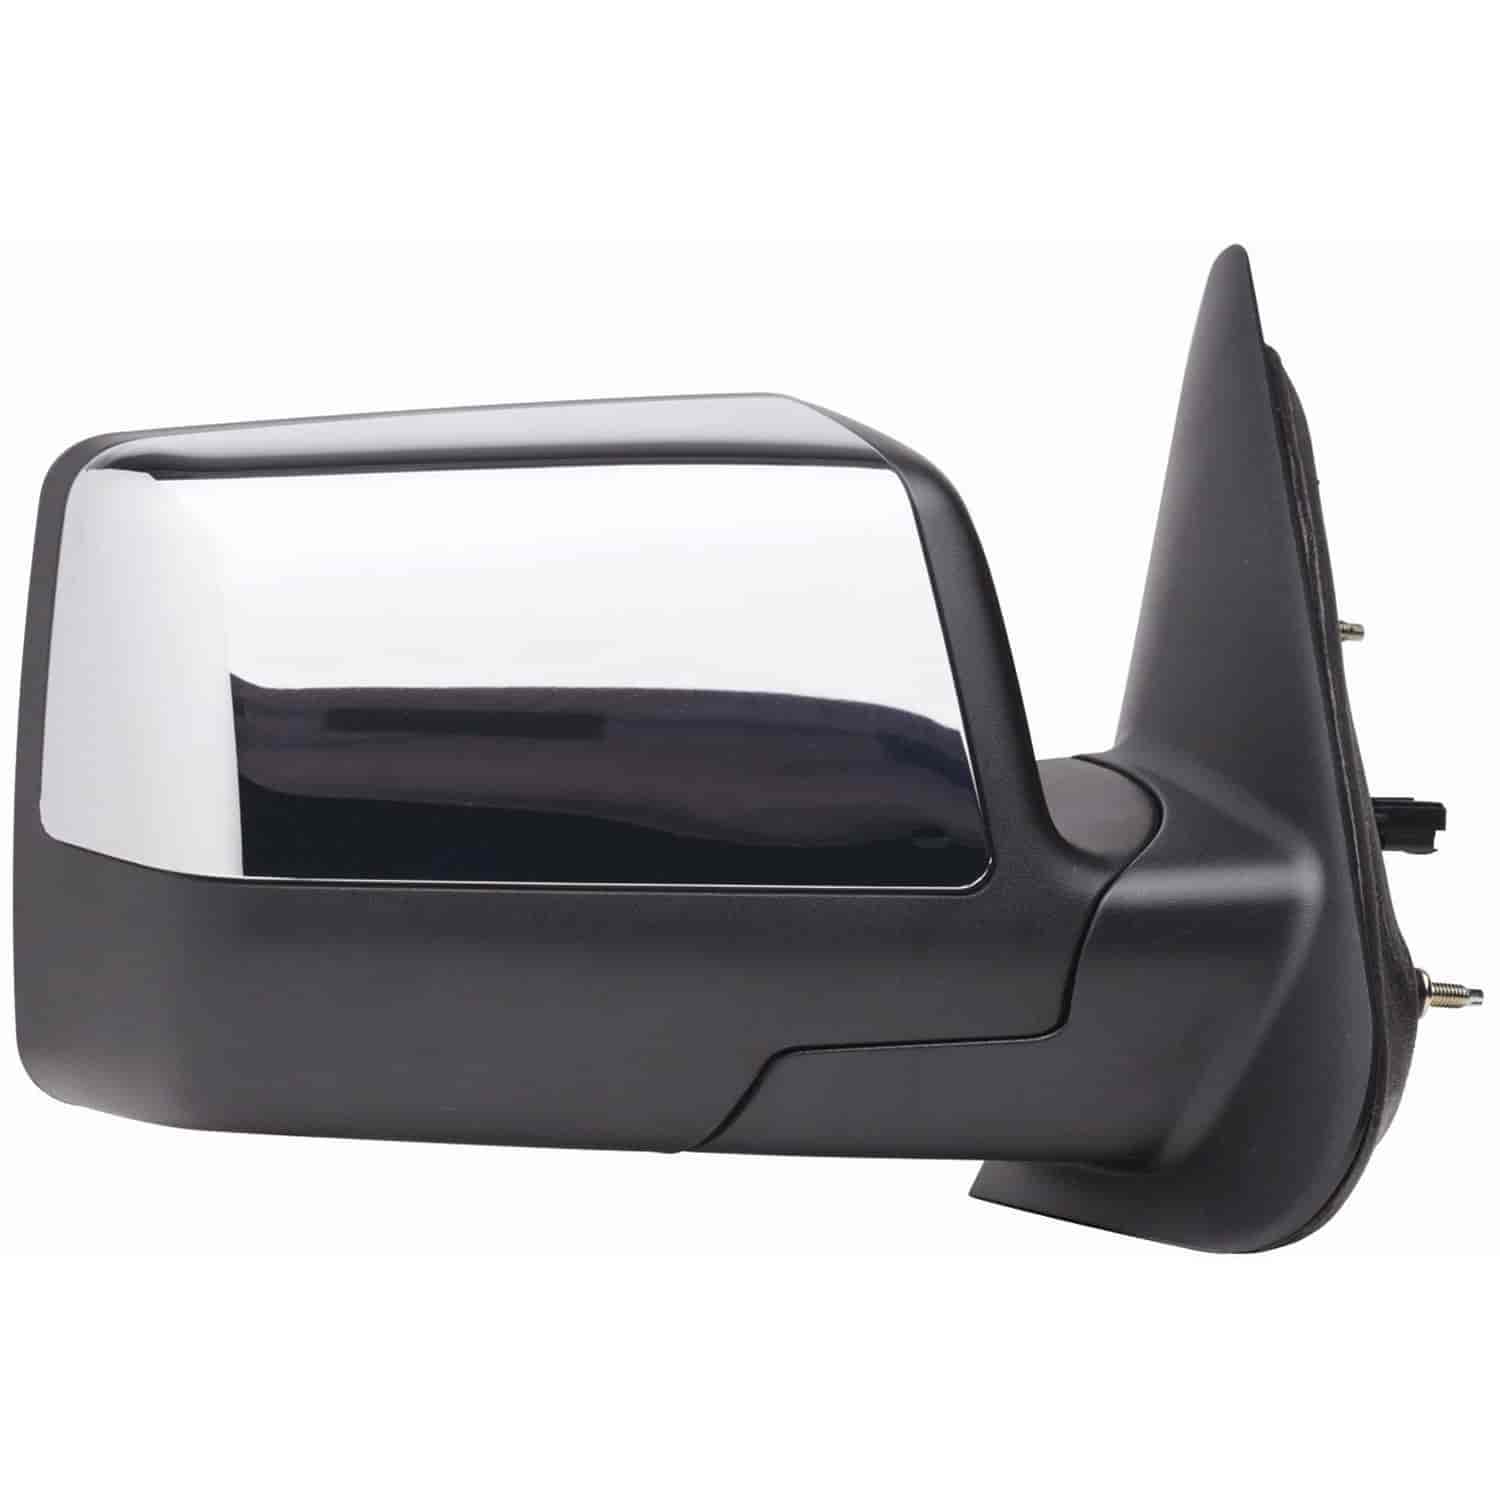 OEM Style Replacement mirror for 06-11 Ford Rangerw/chrome cover passenger side mirror tested to fit